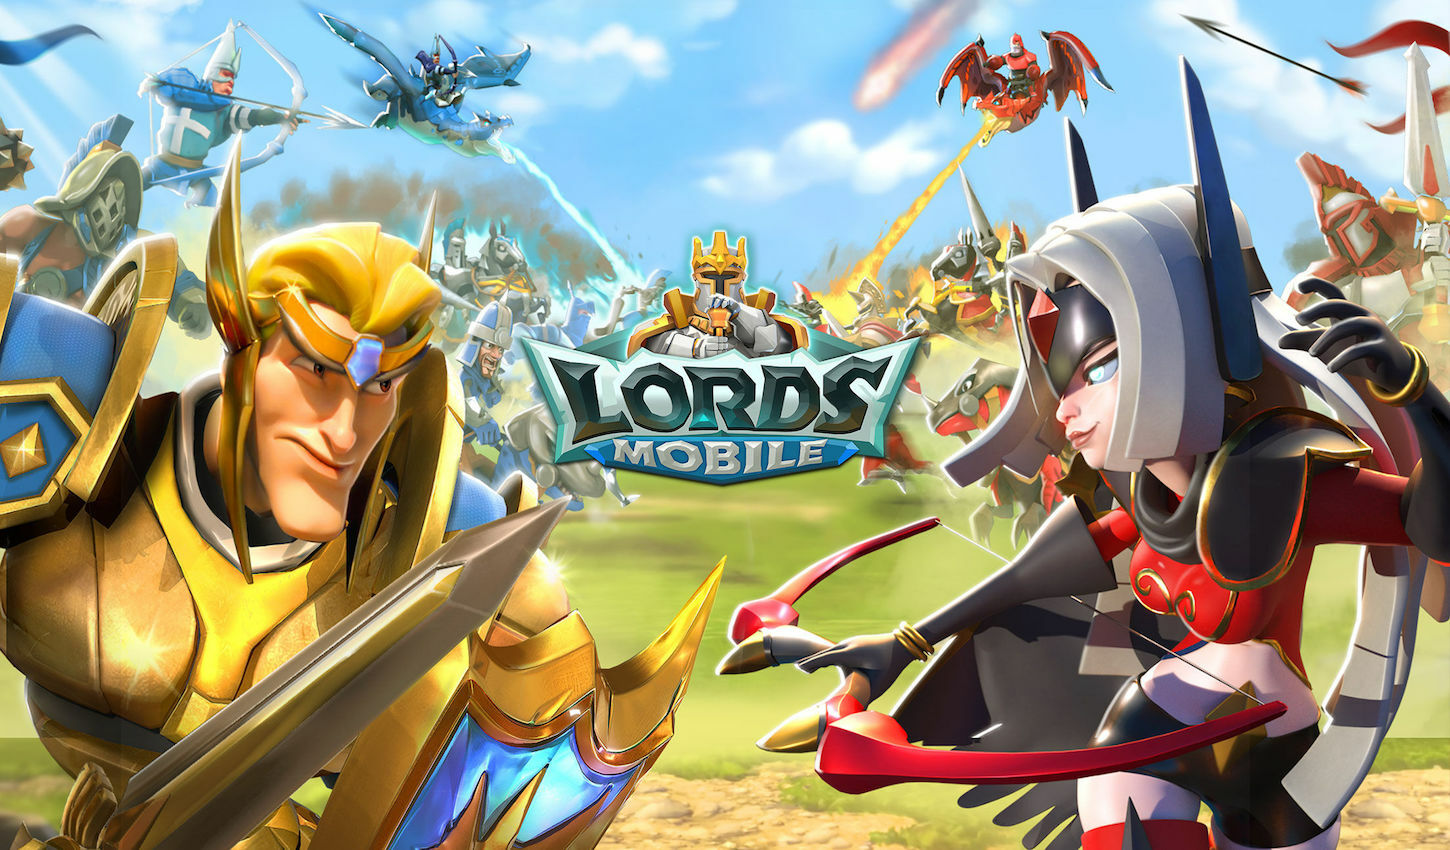 Lords Mobile - Gems Hack?! How To Hack Lords mobile gems? [Hindi